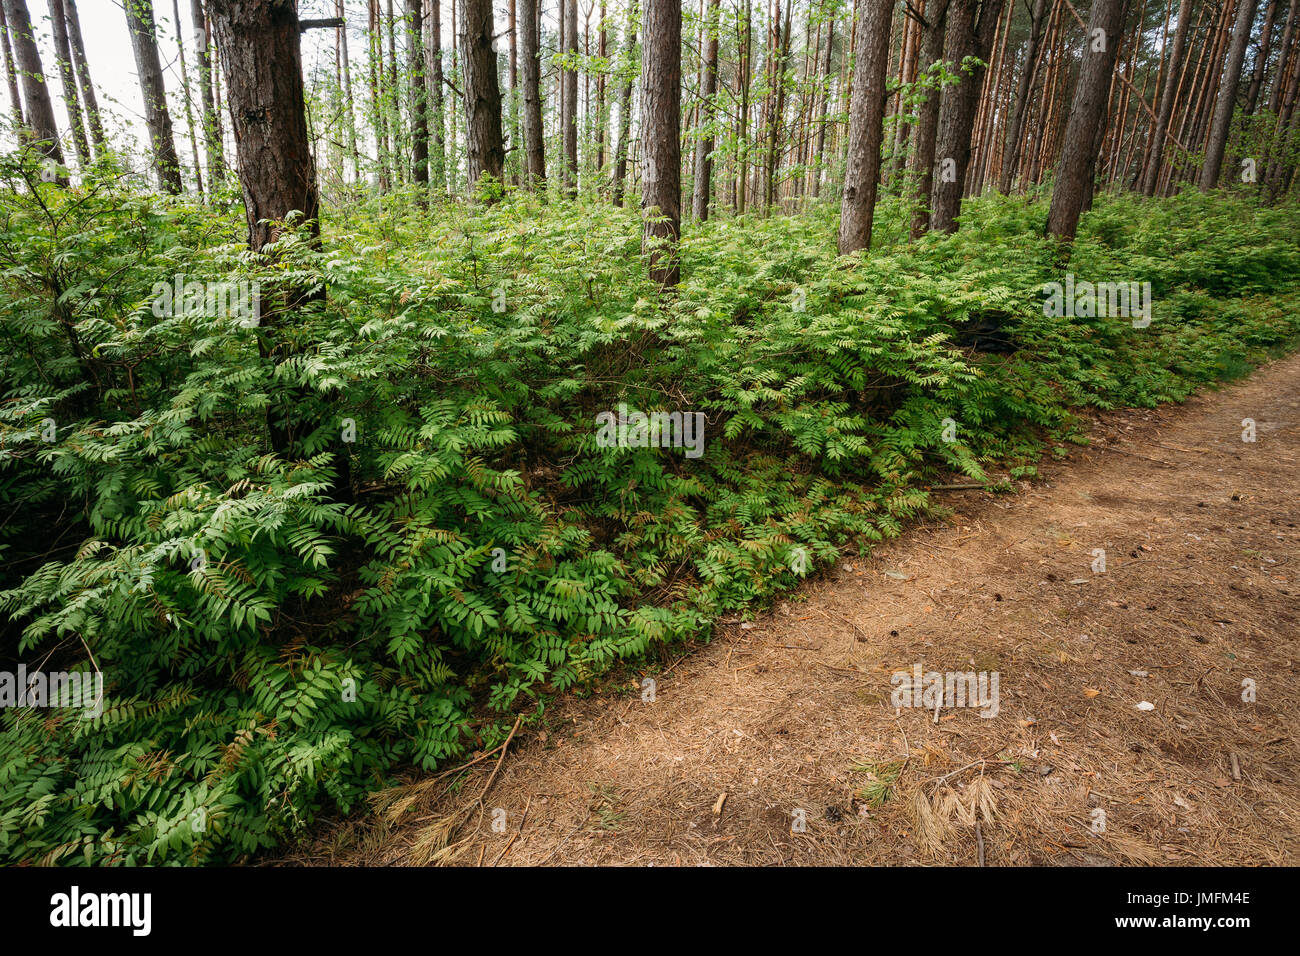 The Fragment Of Forest Road Surface, Strewn With Fallen Pine Needles, Cones And Dense Wild Deciduous Underbrush Bushes Along It In Summer Pine Wood. Stock Photo